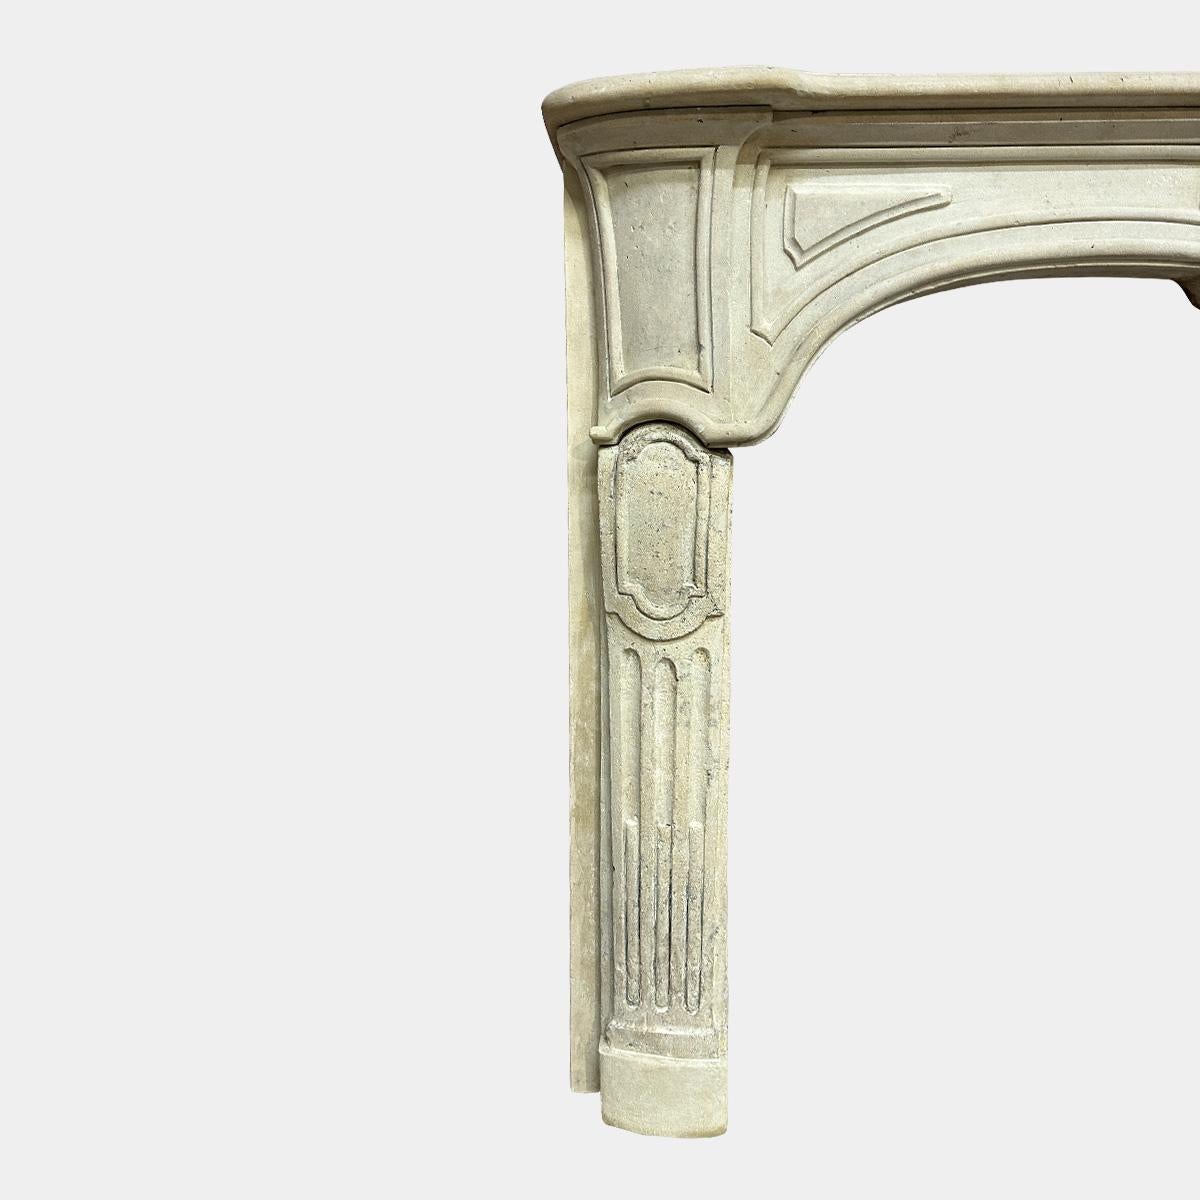 An 18th century French Caen Stone Provincial Fireplace. The cantered jambs with stop fluted front panels and carved raised panels. The frieze serpentine in design with raised panelled end, raised fielded panels and carved centre cartouche. A wide